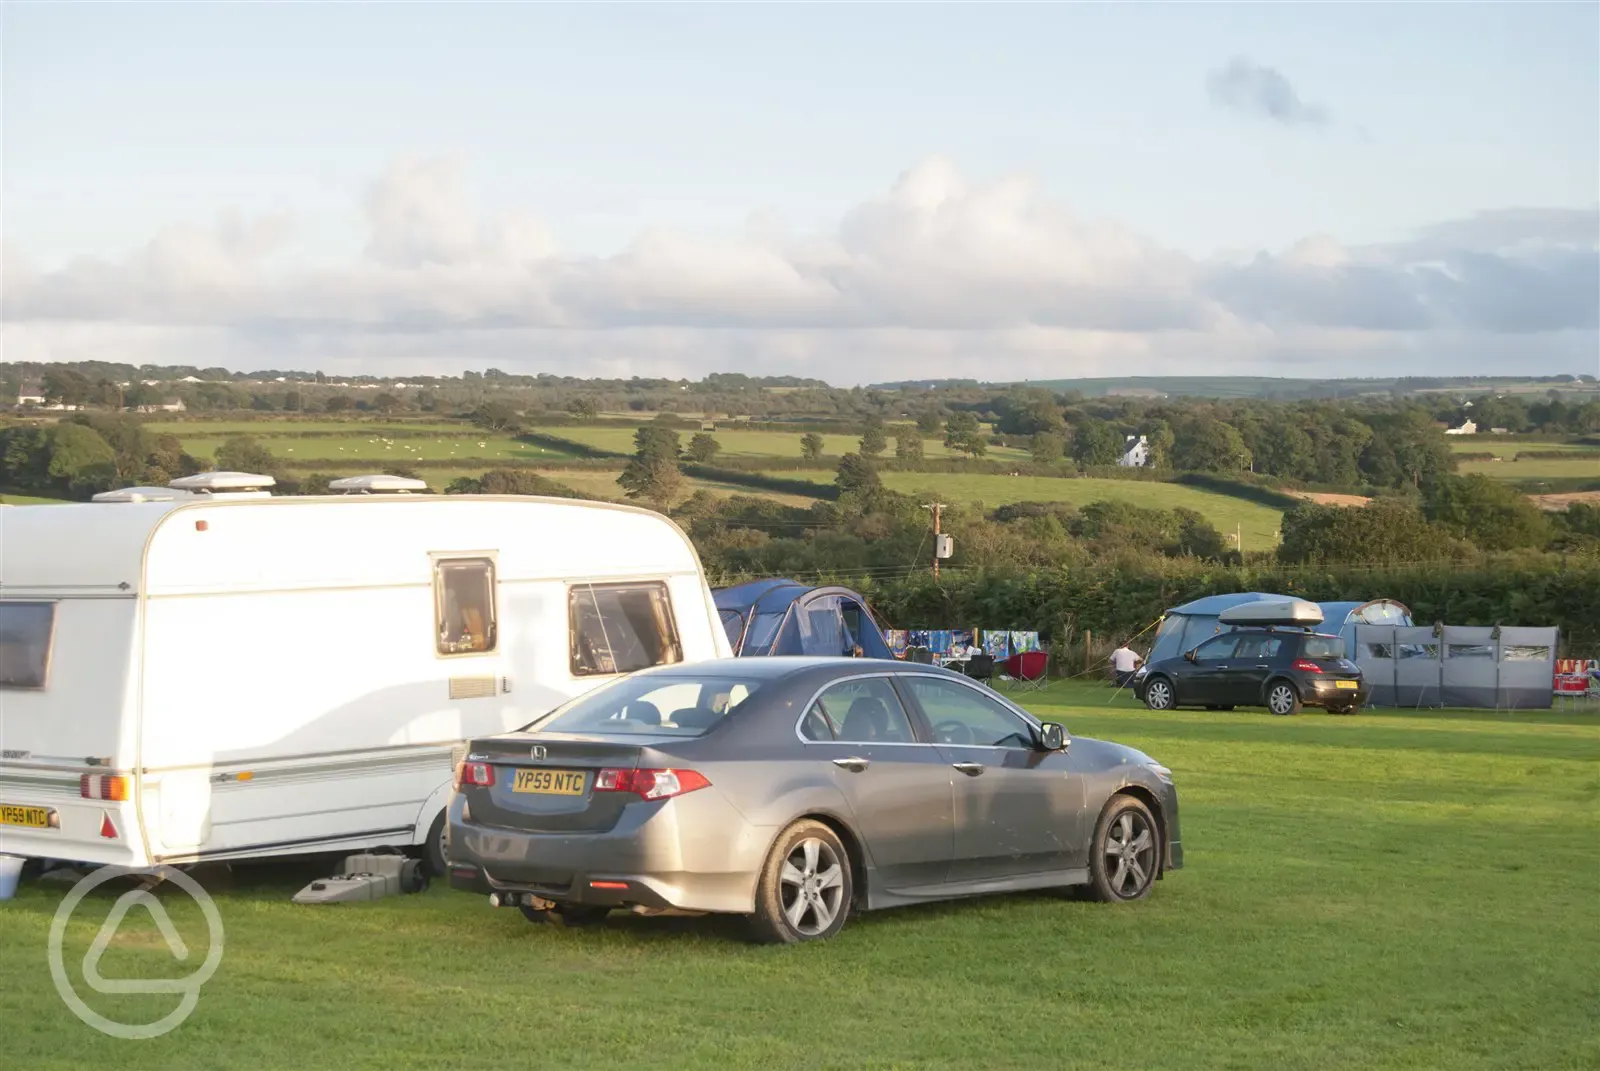 Caravan and motorhome pitches